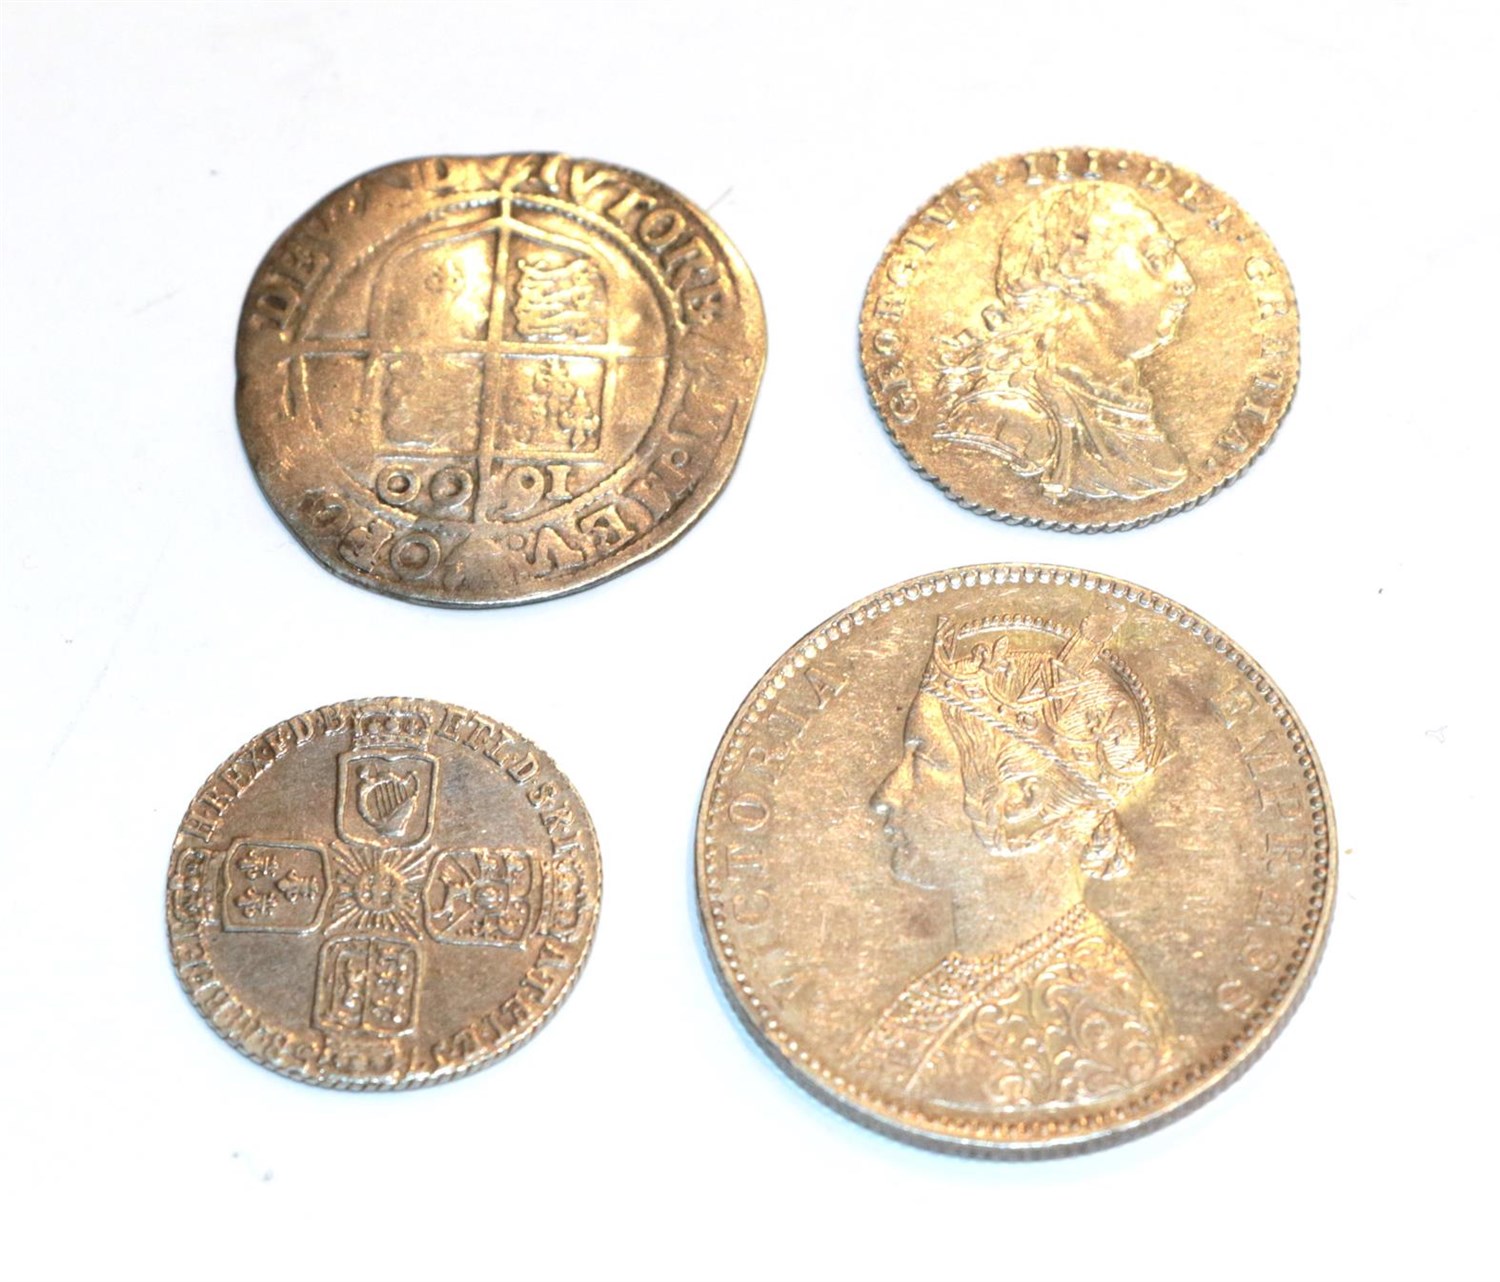 Lot 120 - A micellany of 4 x Silver Coins consisting of: Elizabeth I, 1600 Sixpence, mintmark 0. Bust 6c...